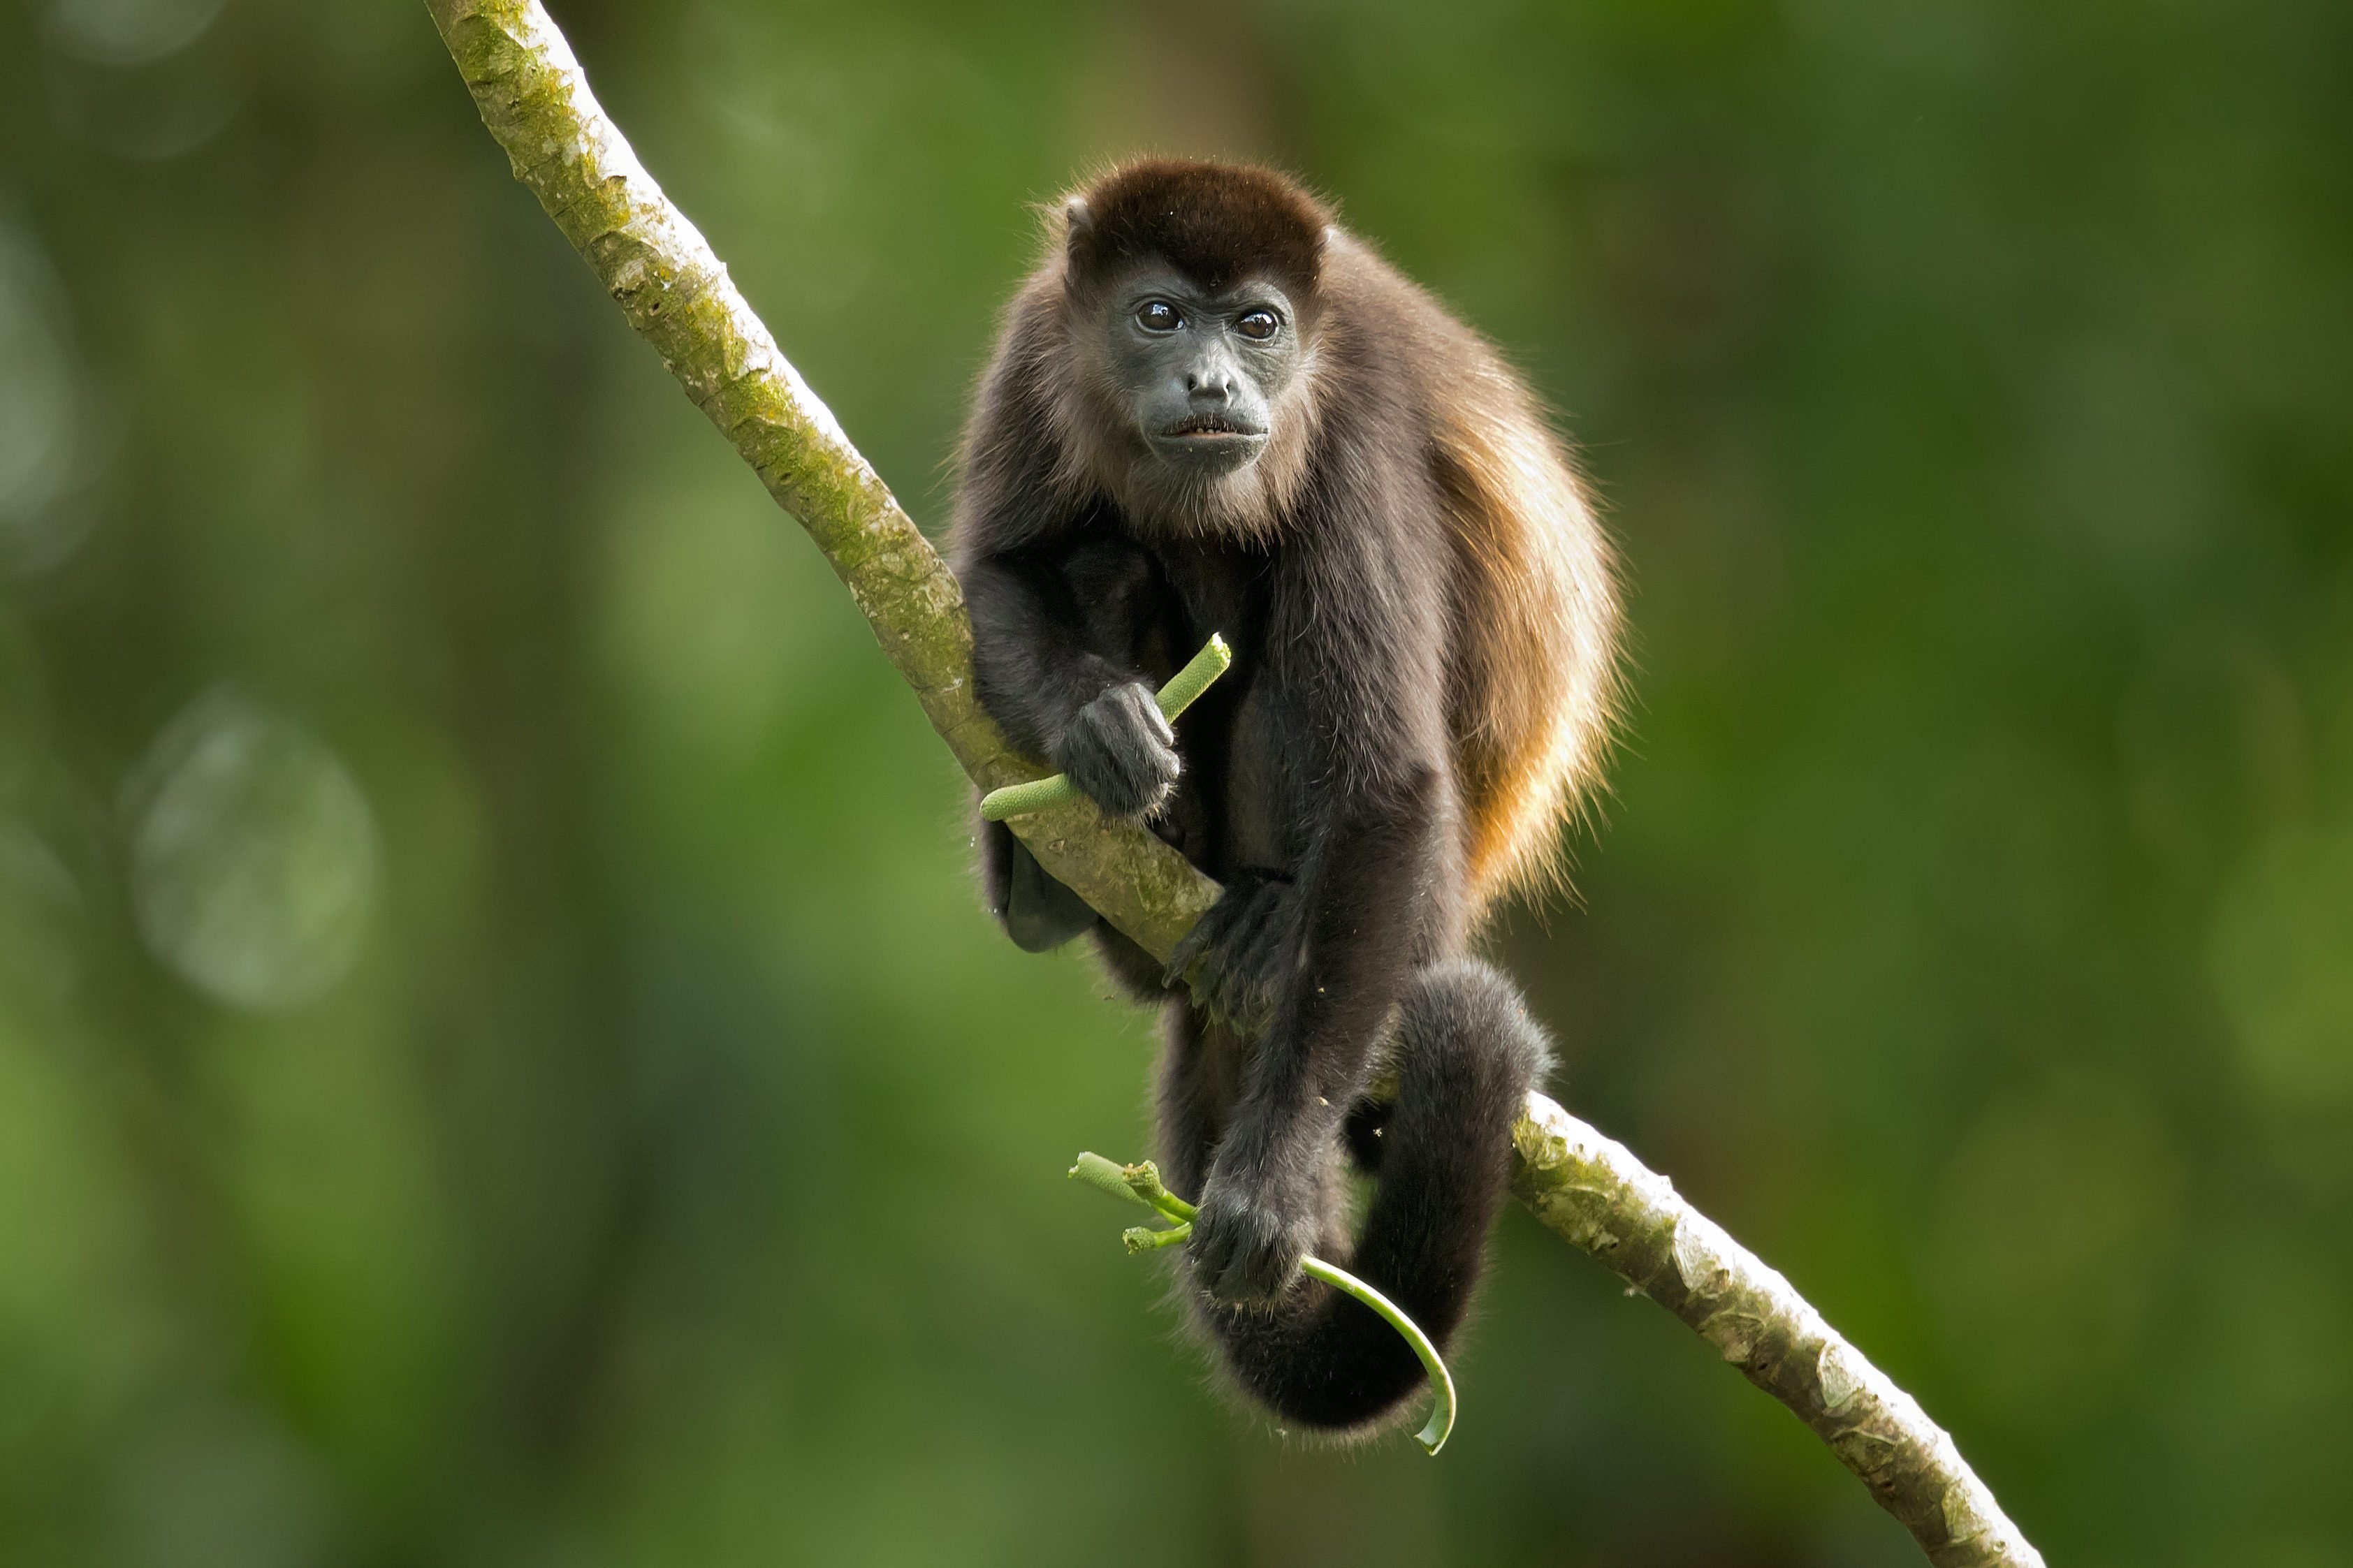 Mantled howler (Alouatta palliata), or golden-mantled howling monkey, is a species of howler monkey, a type of New World monkey, from Central and South America.